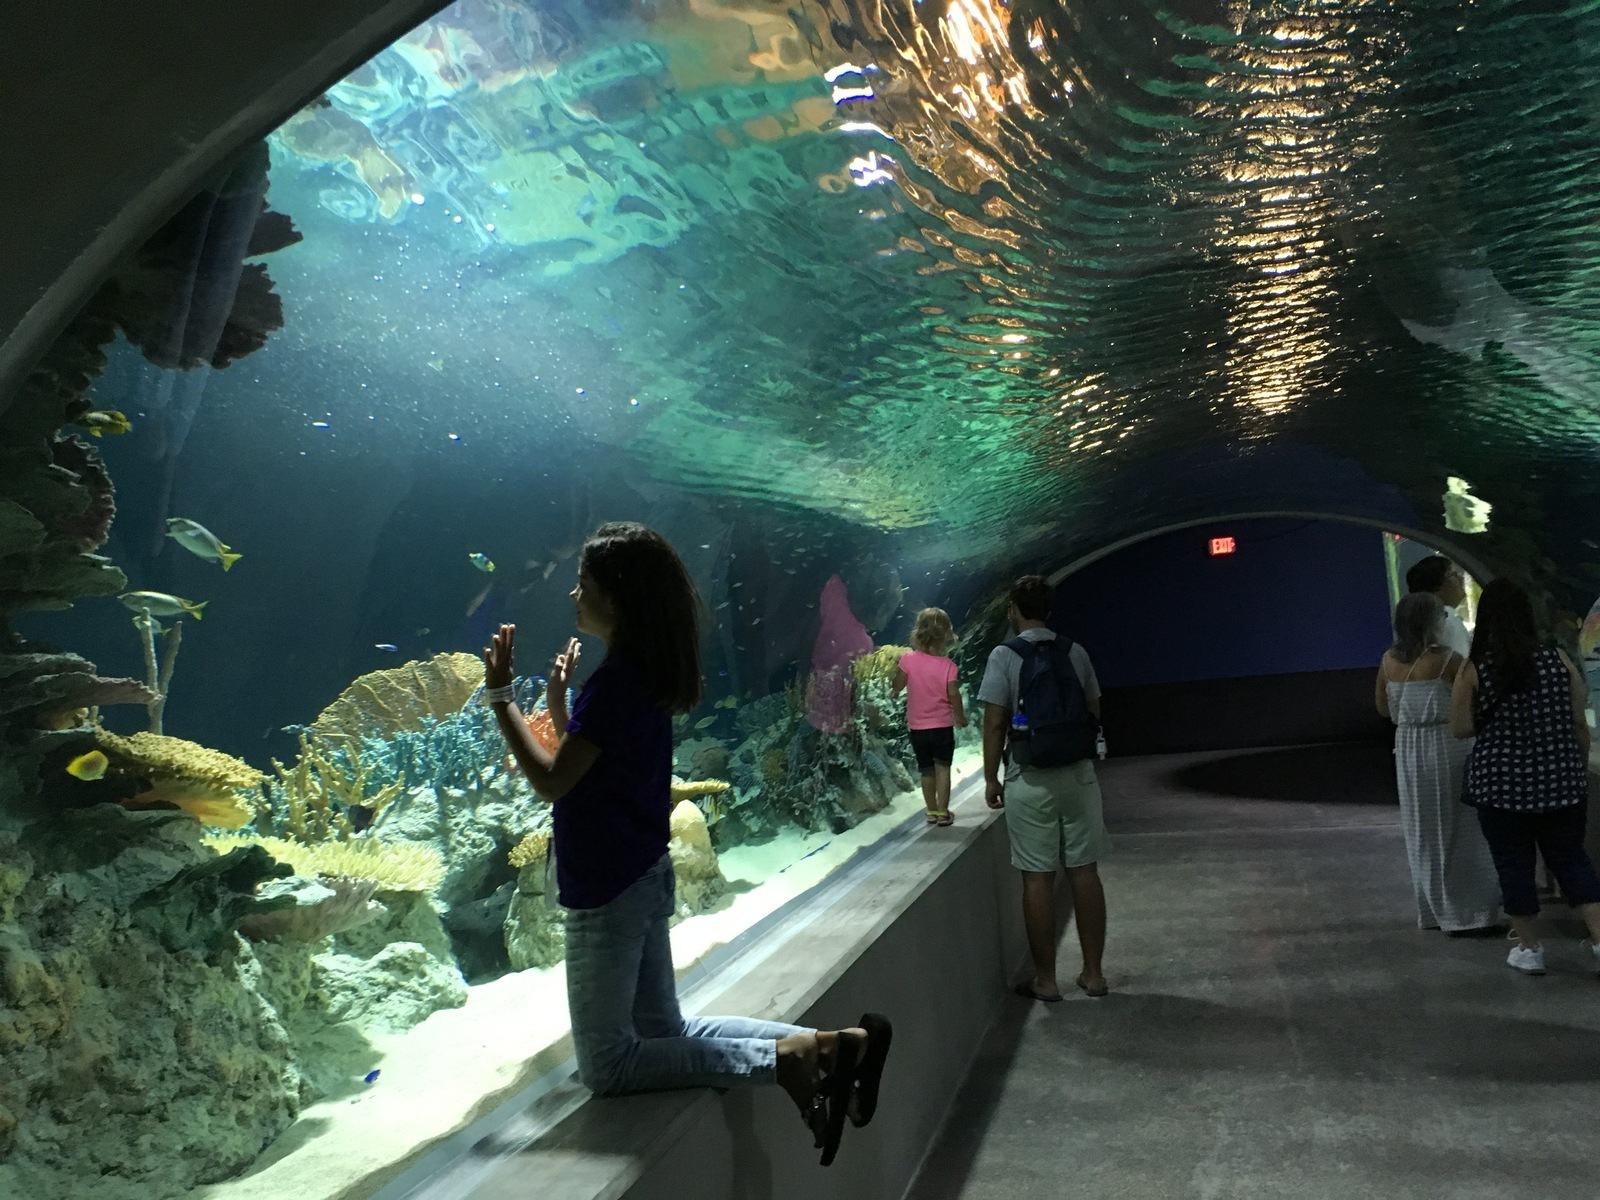 OdySea Aquarium in Scottsdale: 8 tips, things to know before you take kids